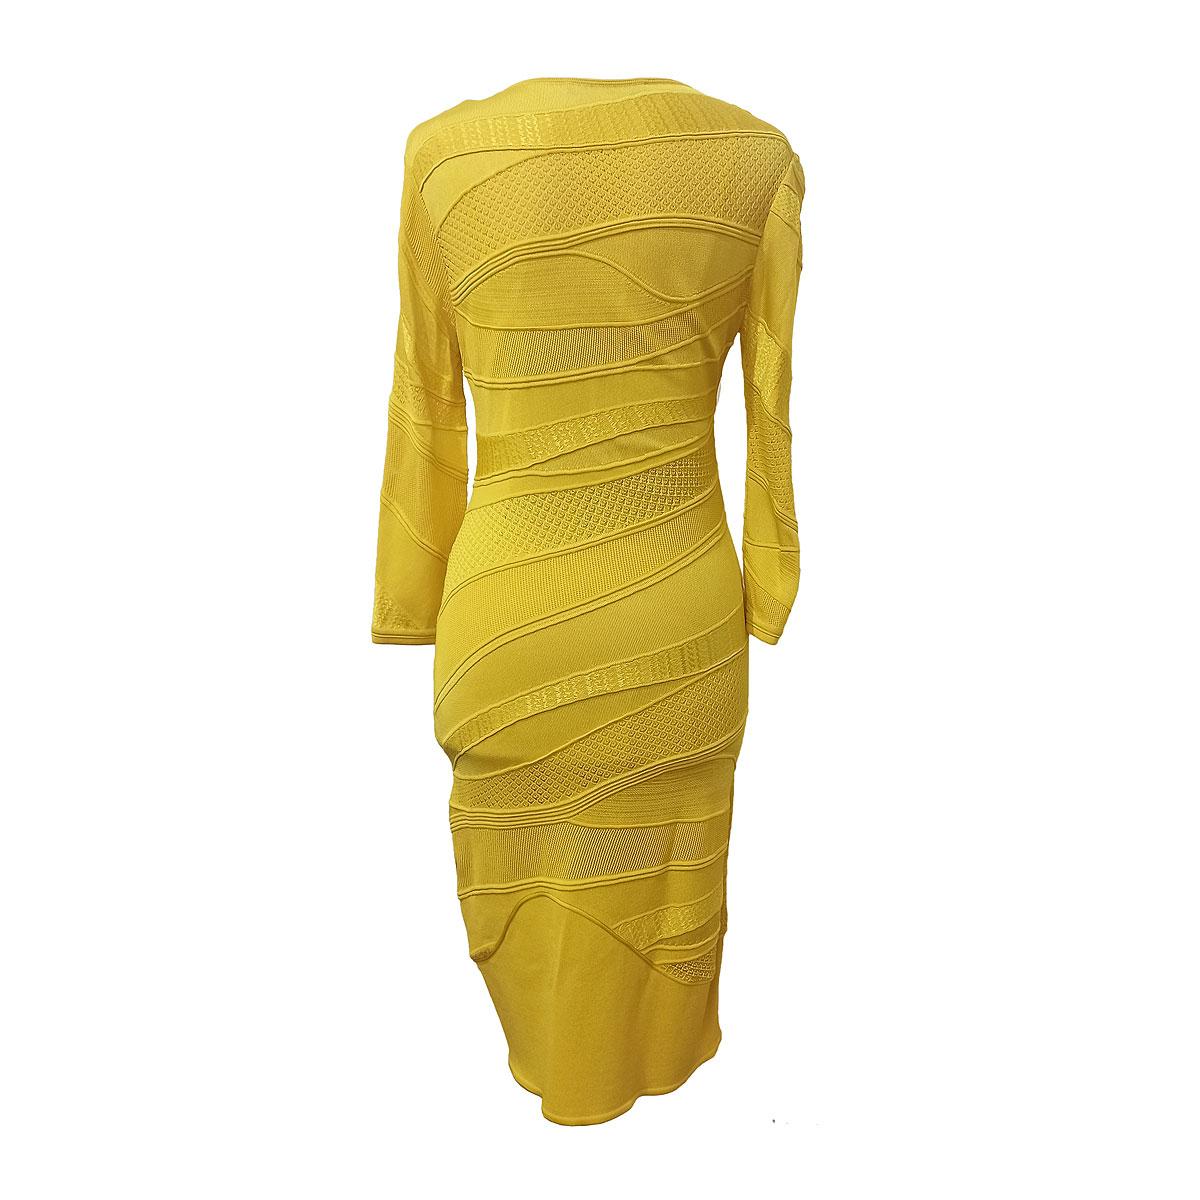 Beautiful Roberto Cavalli dress
Fabric and size tags removed
Yellow color
Cotton
V neck
With paired petticoat
3/4 sleeves
Maximum length cm 98 (38,58 inches)
Shoulders cm 40 (15,74 inches)
Worldwide express shipping included in the price !